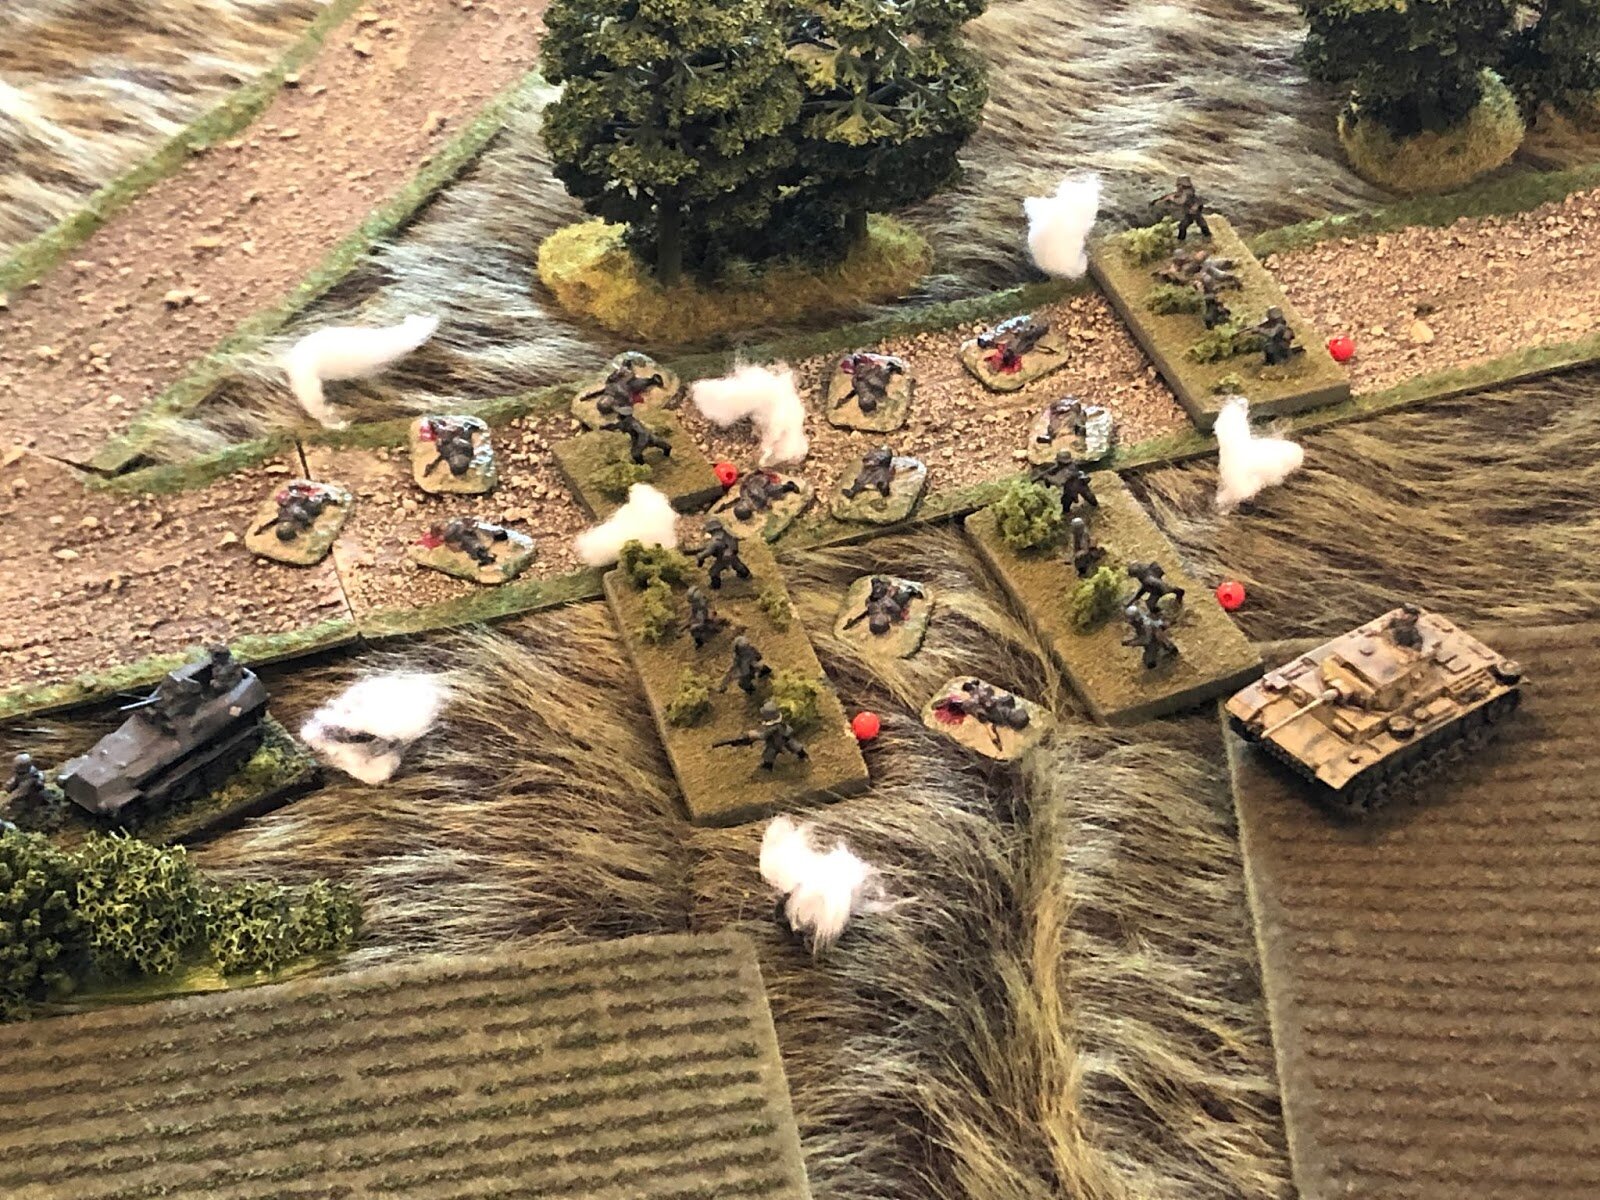 And it's vicious!  82mm HE rounds pound the crap out of 1st Company, knocking out three squads and suppressing the rest!!!